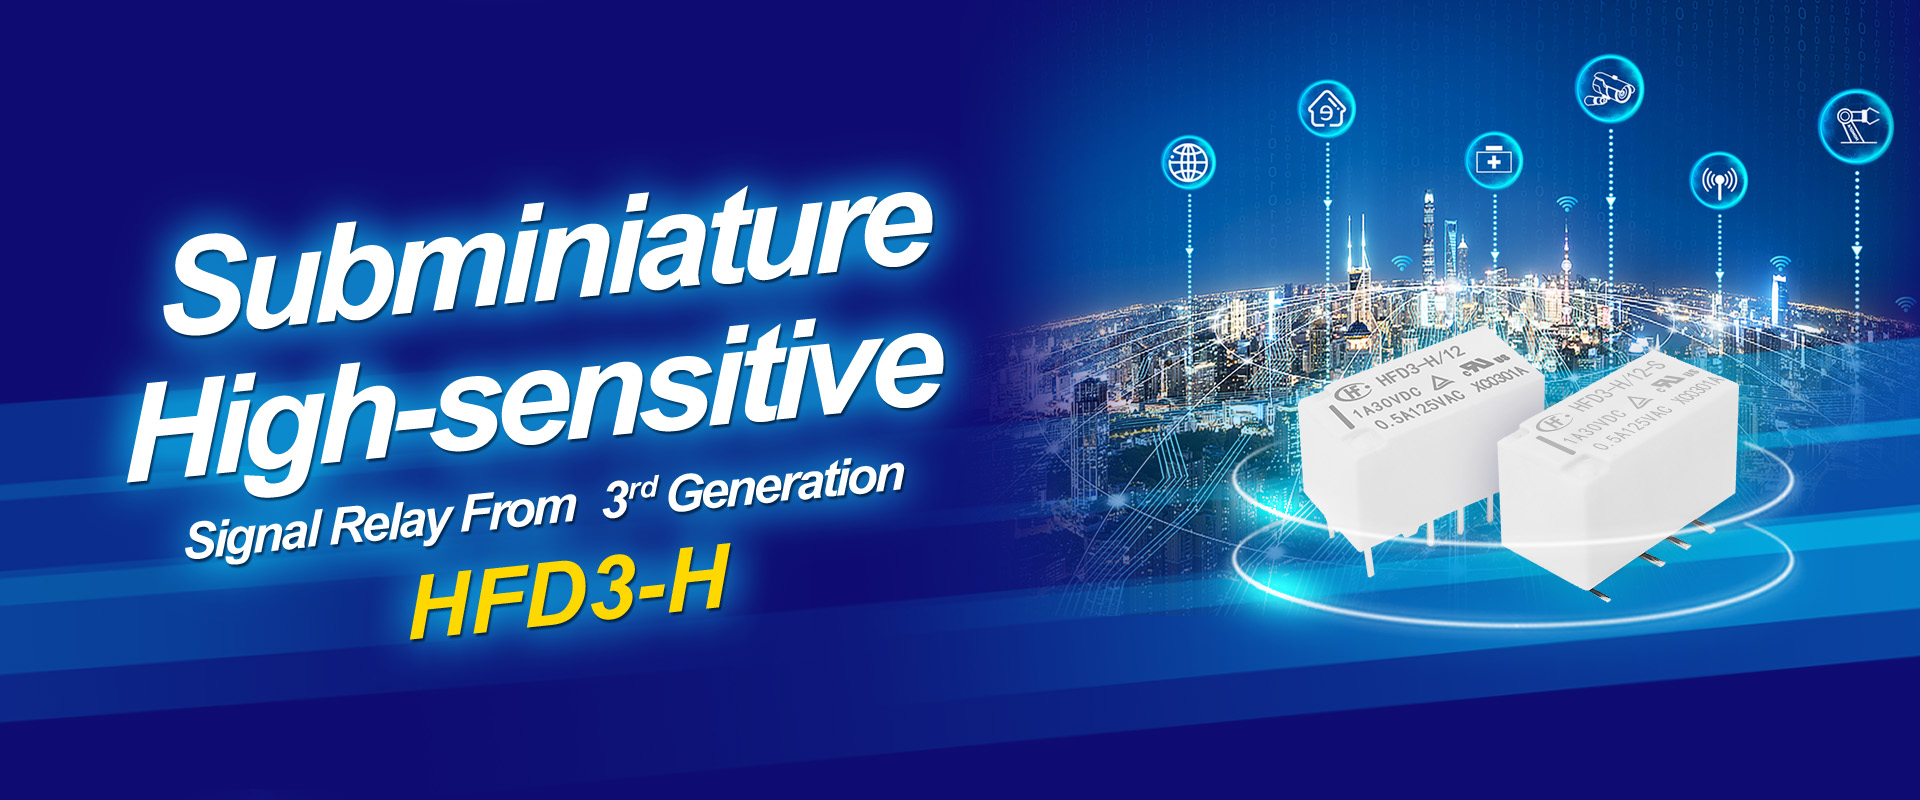 Subminiature High-sensitive Signal Relay From 3rd Generation HFD3-H